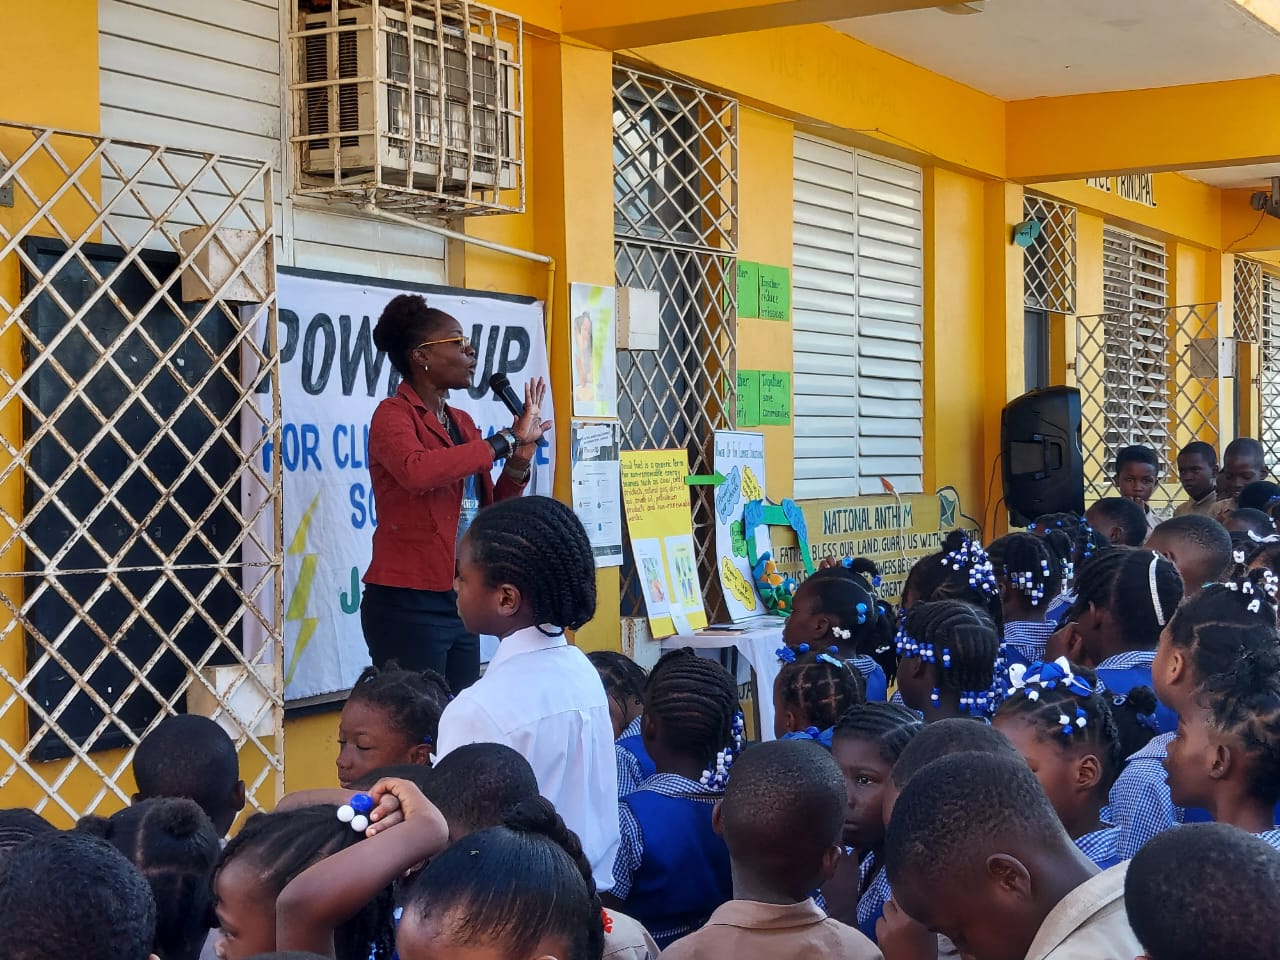 Clarendon, Jamaica, November 9: In several locations throughout the country, activists, students and teachers kickstart a whole month of actions to bring awareness about the importance of powering down fossil fuels, and are calling for community leaders to invest in renewable energy solutions. This photo happened at the Osbourne Store Primary and Infant School. Photo credit: Plakortis